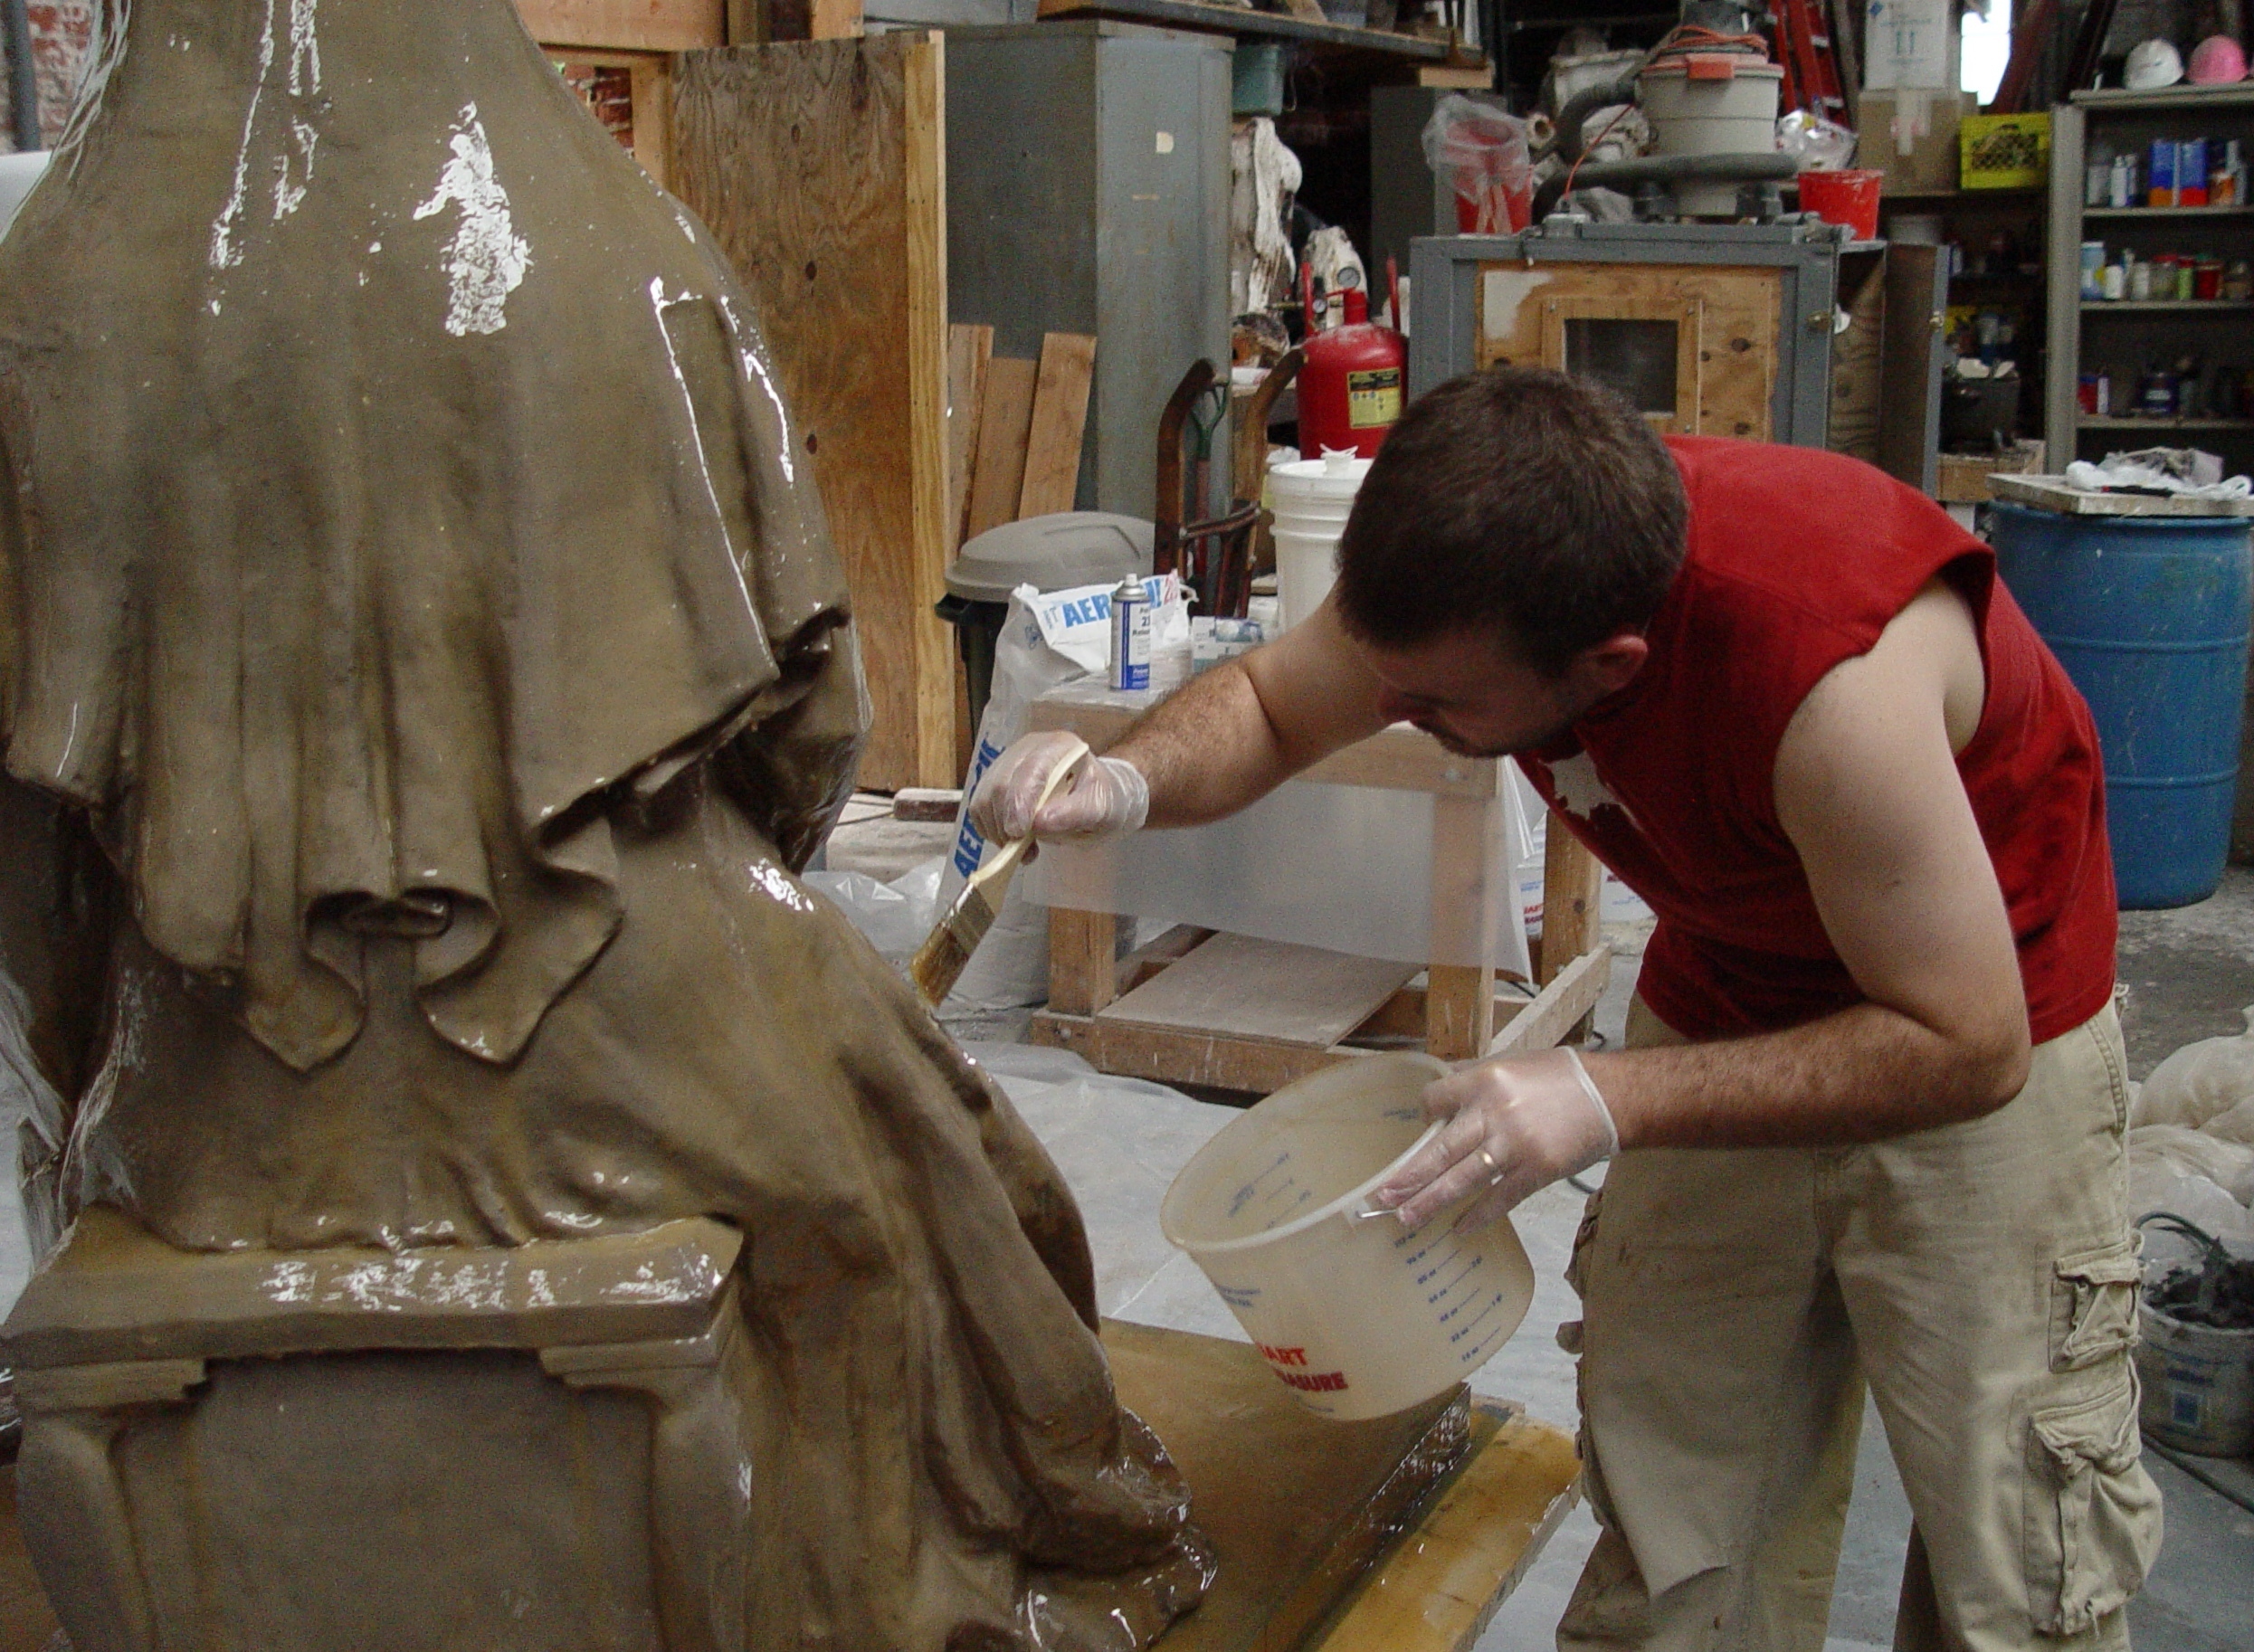 Zachary Kainz is applying the first coat of the rubber mold